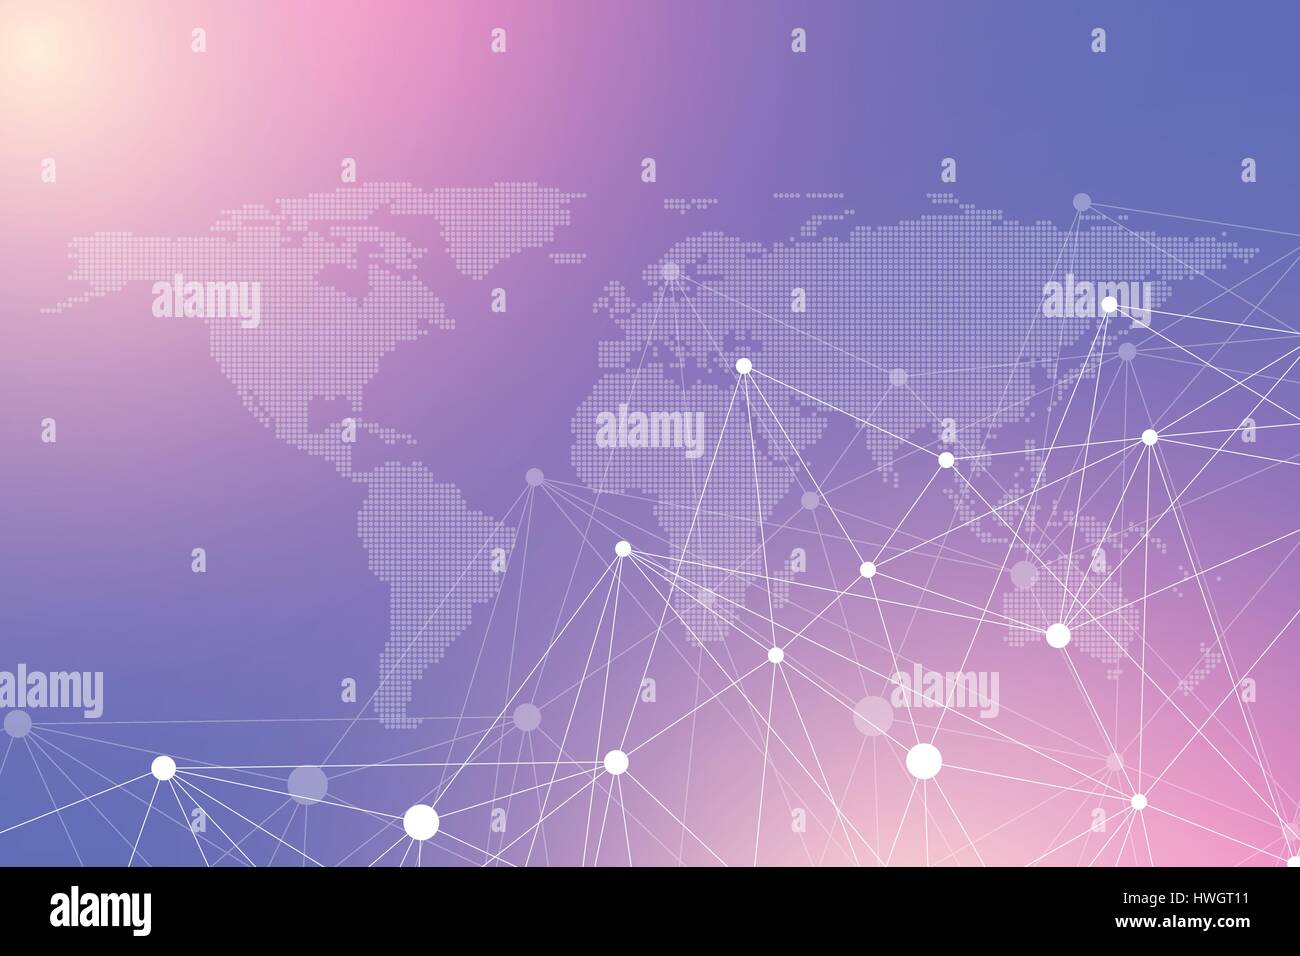 Geometric graphic background communication with dotted World Map. Big data complex. Particle compounds. Network connection, lines plexus. Minimalistic chaotic design, vector illustration. Stock Vector